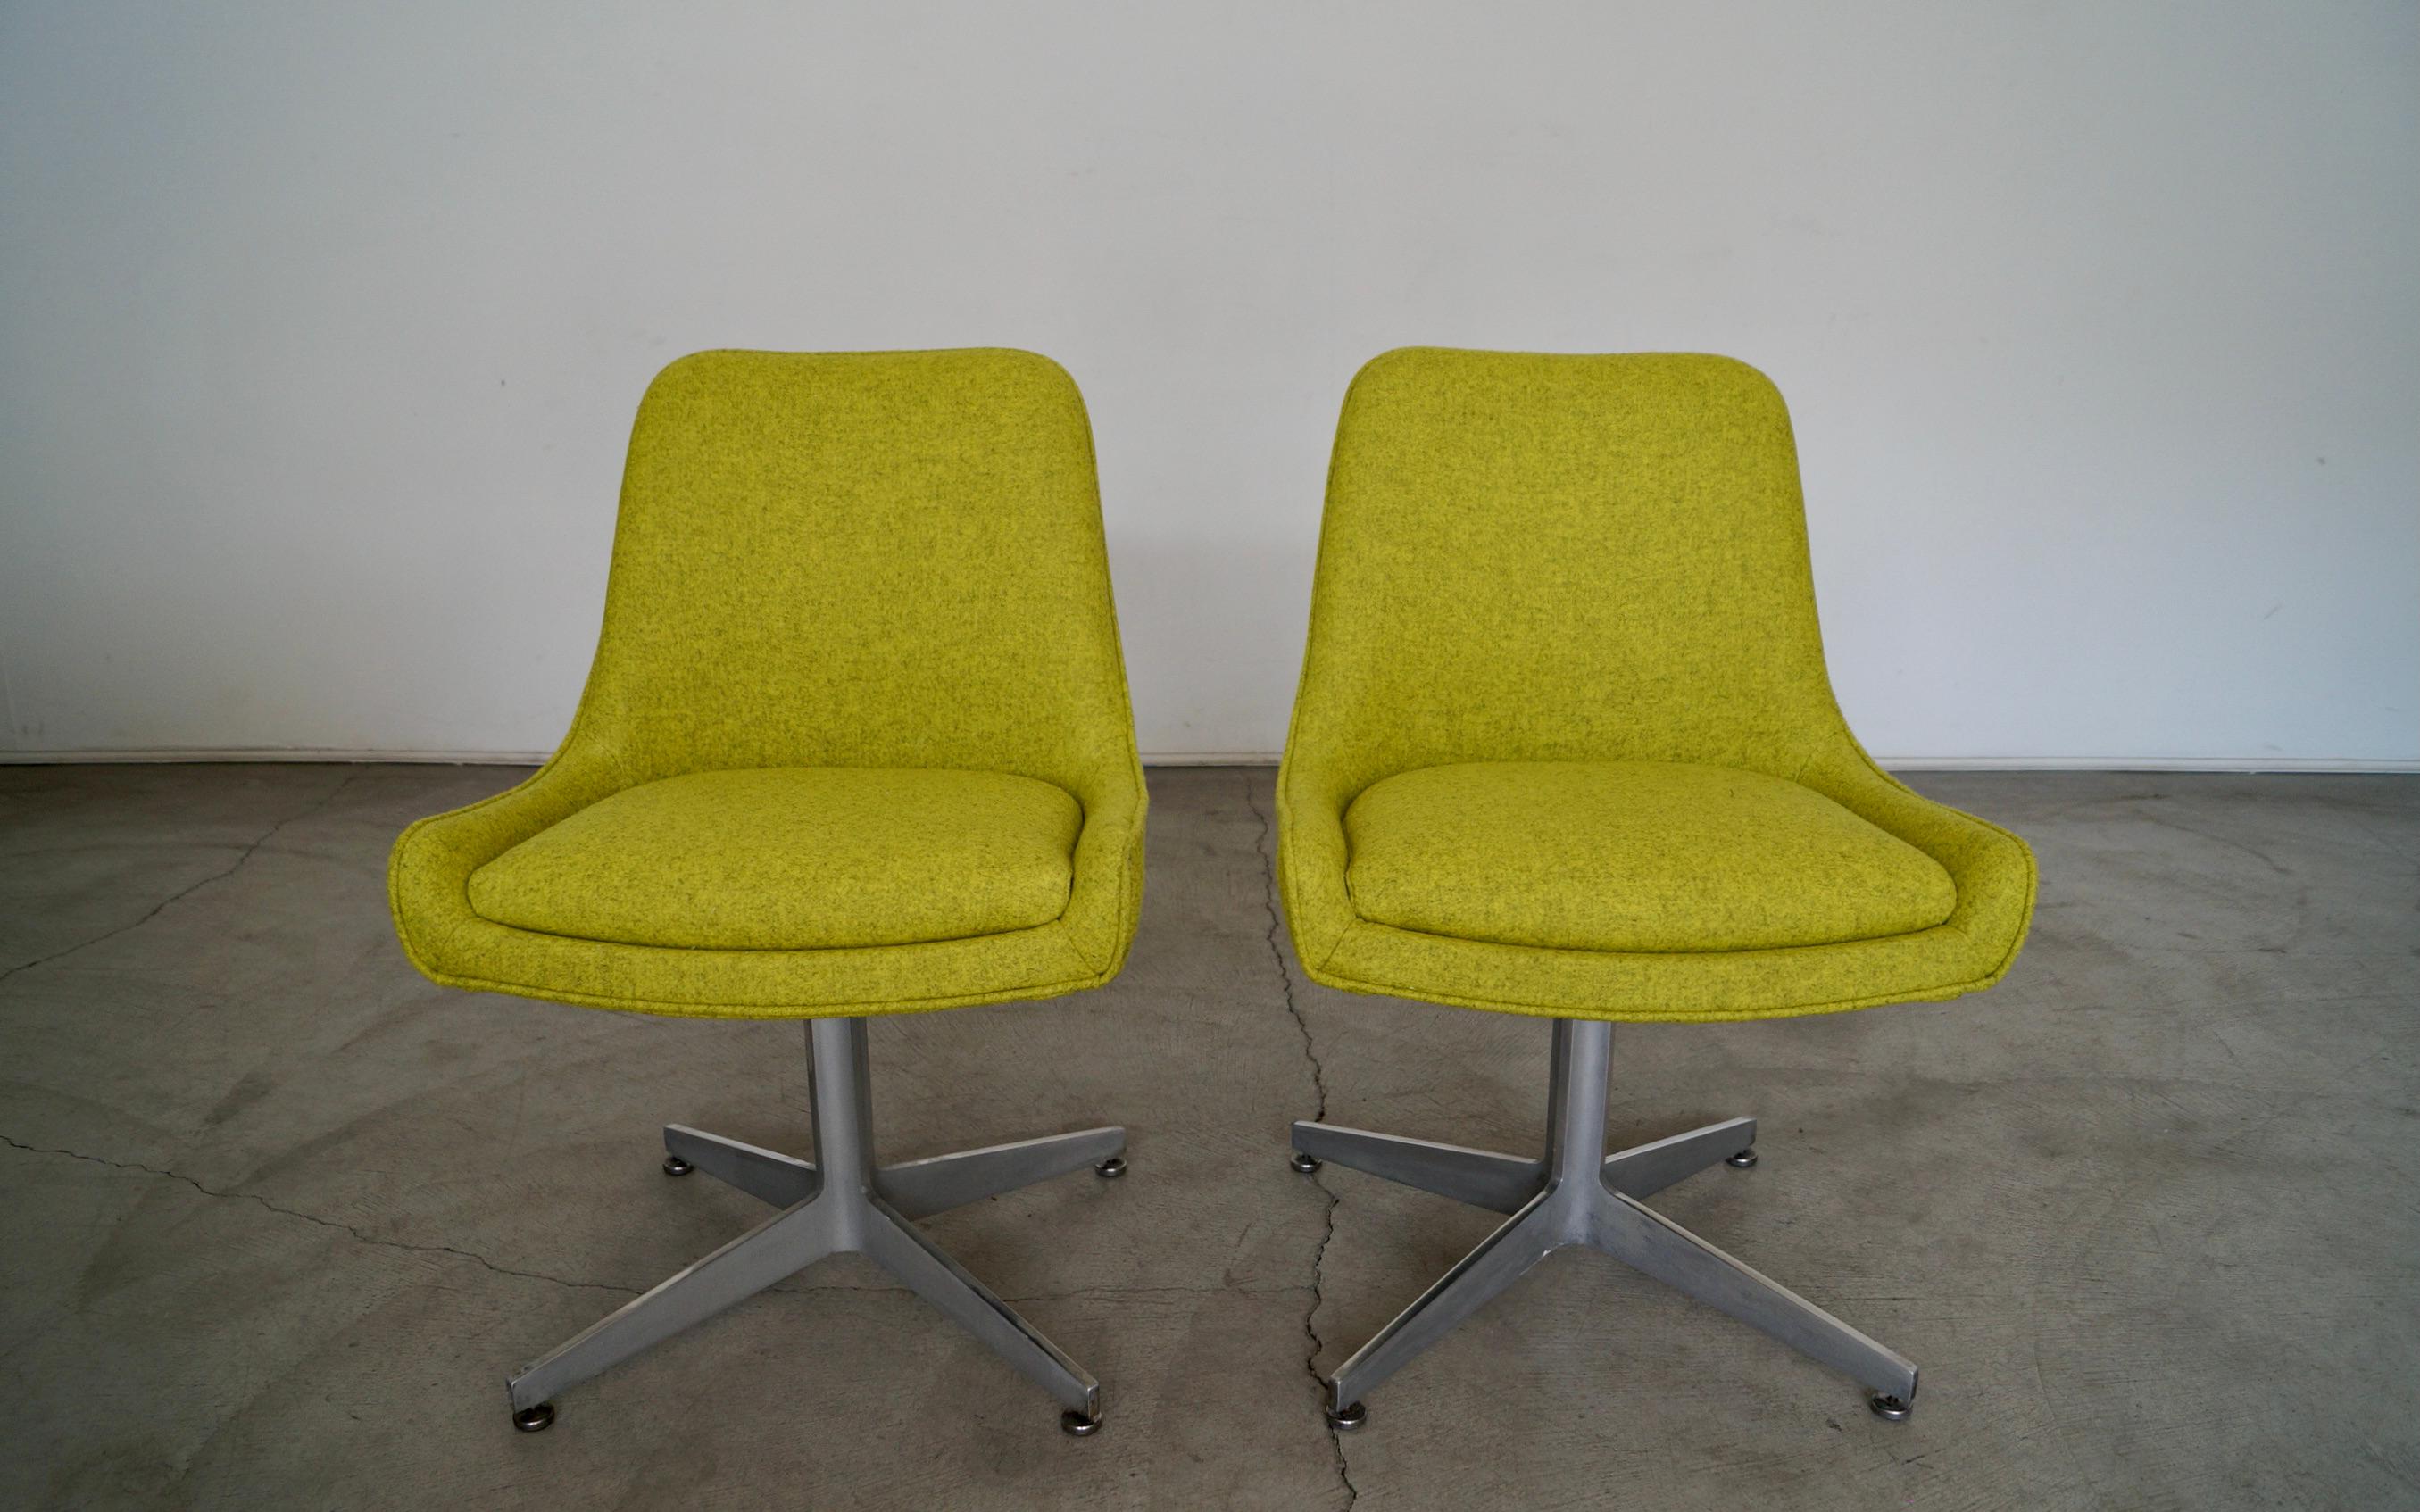 1960's Mid-Century Modern Side Chairs, a Pair In Excellent Condition For Sale In Burbank, CA